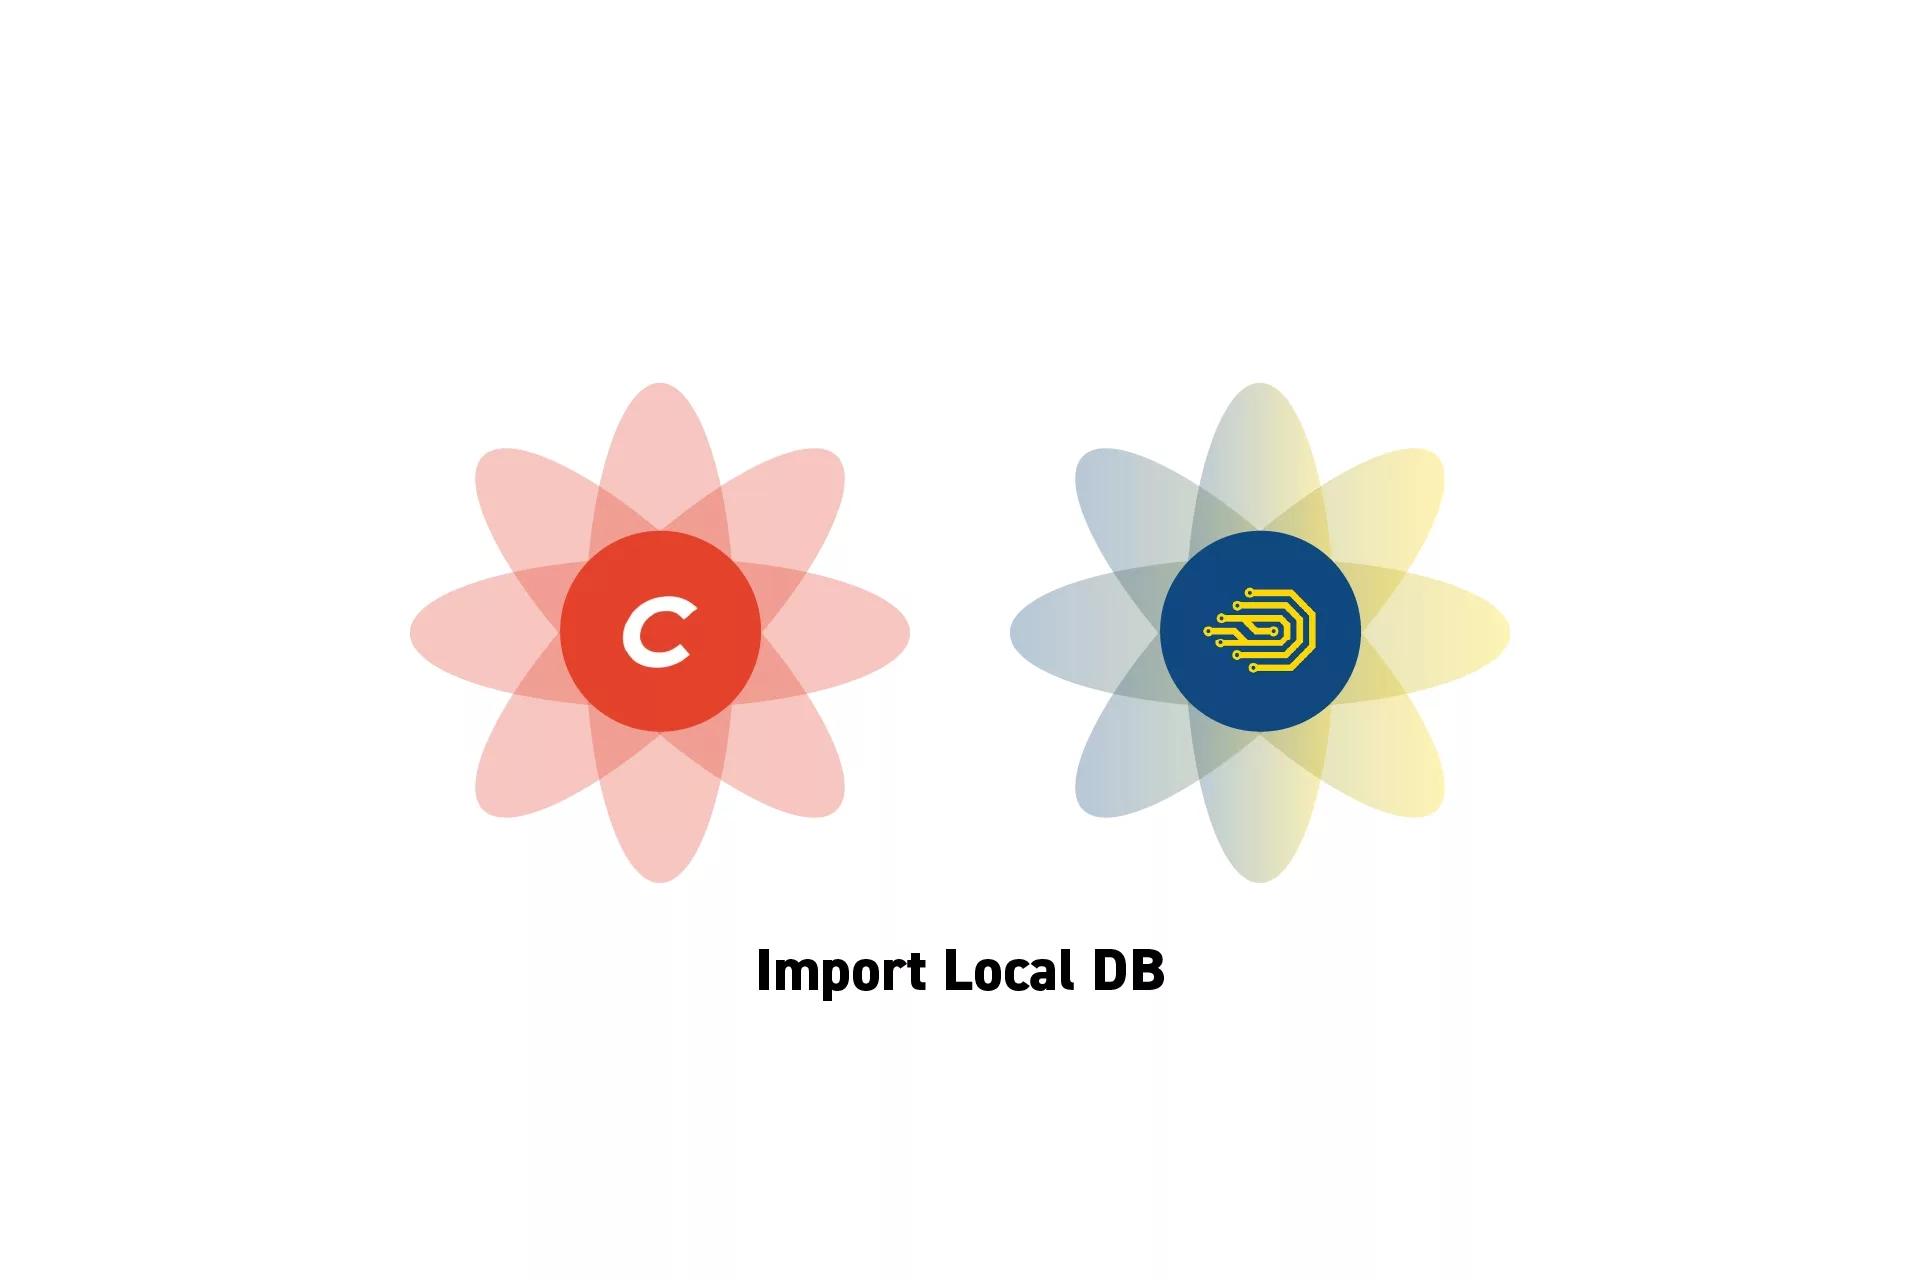 Two flower that represent Craft CMS and DDEV. Beneath them sits the text "Import Local DB."